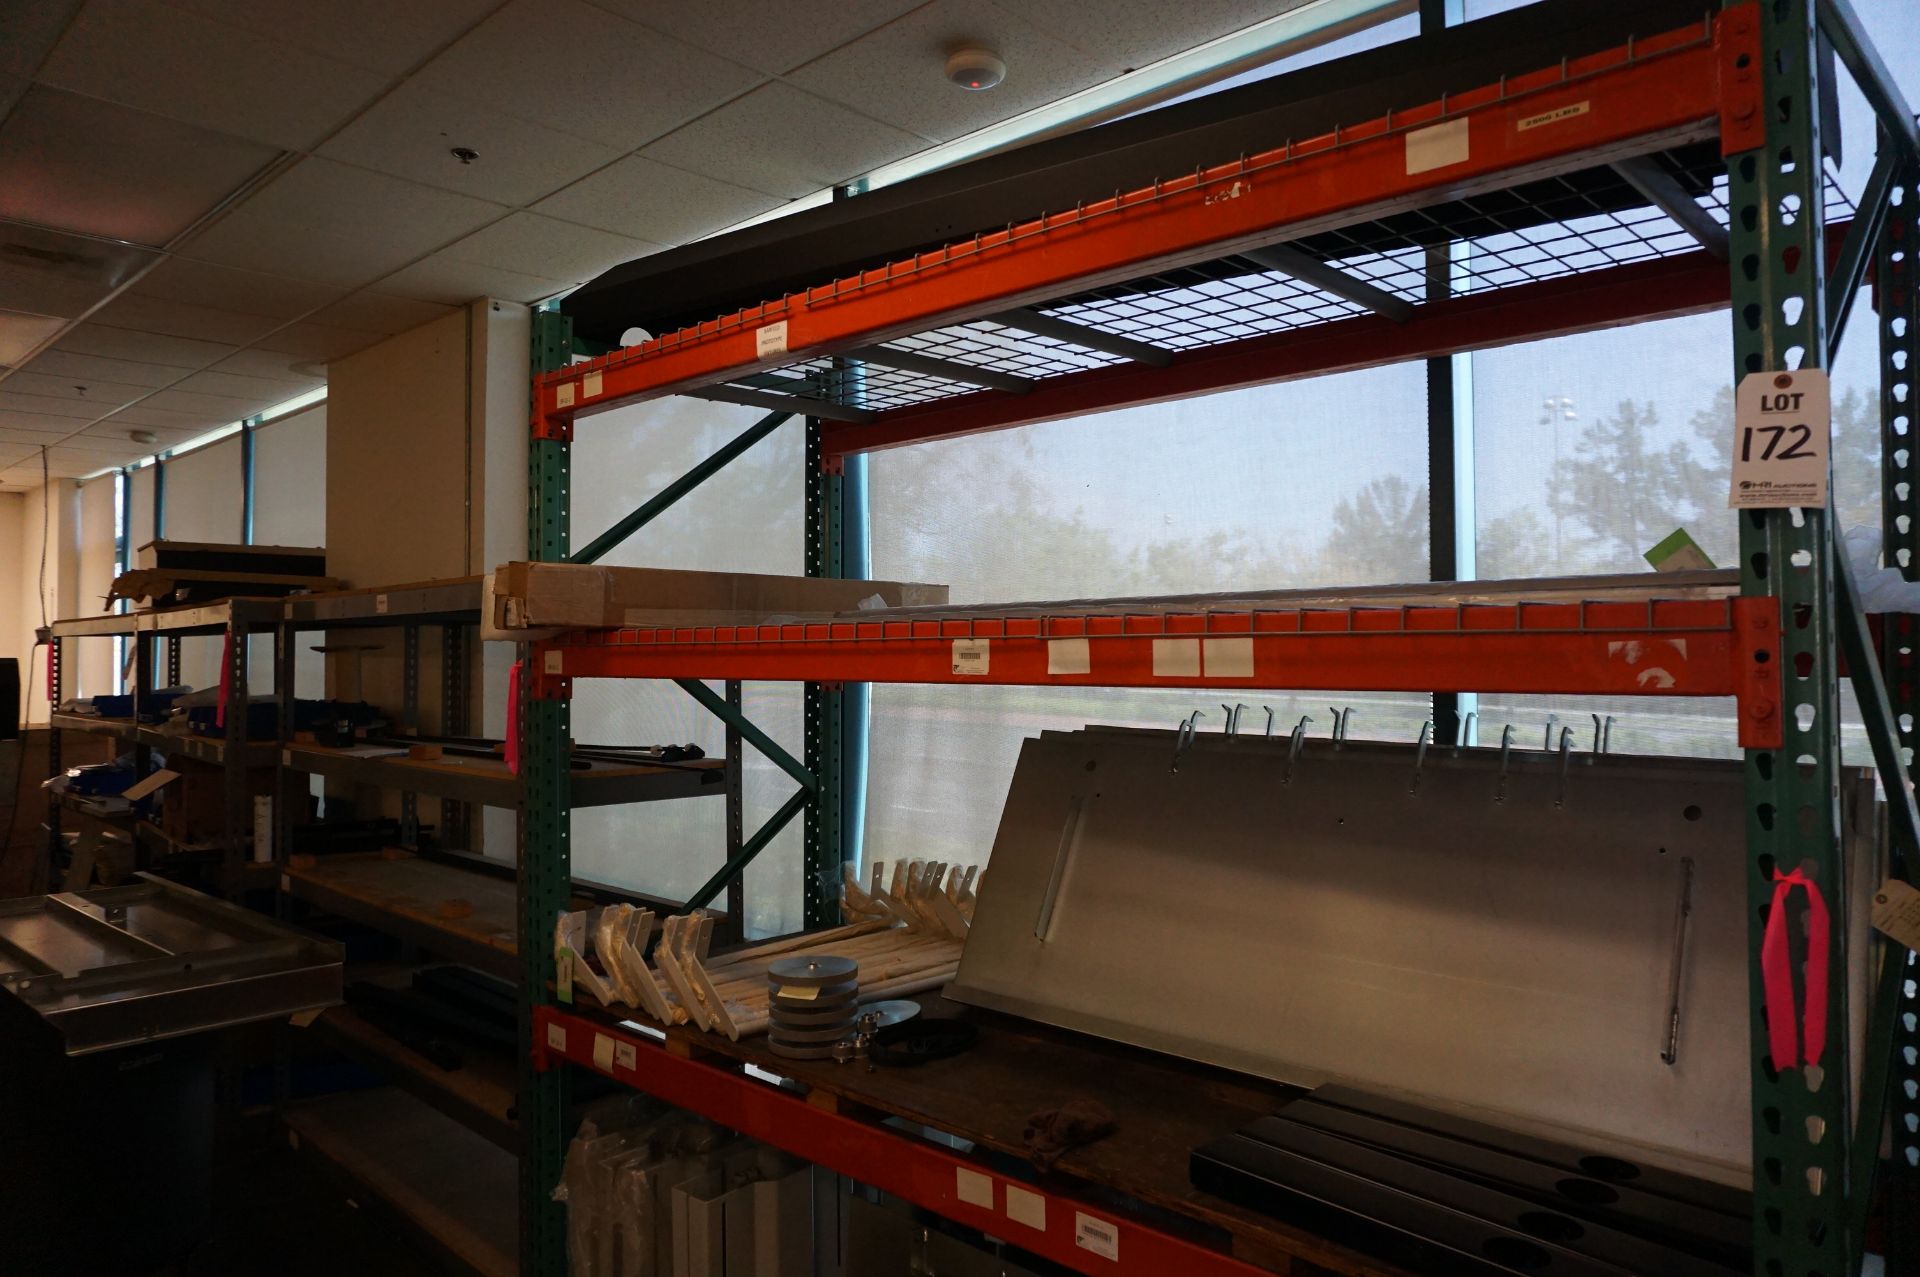 INVENTORY RACKS ALONG WALL IN ASSEMBLY AND REPAIR AREA *RACKS ONLY NO CONTENTS* - Image 4 of 5